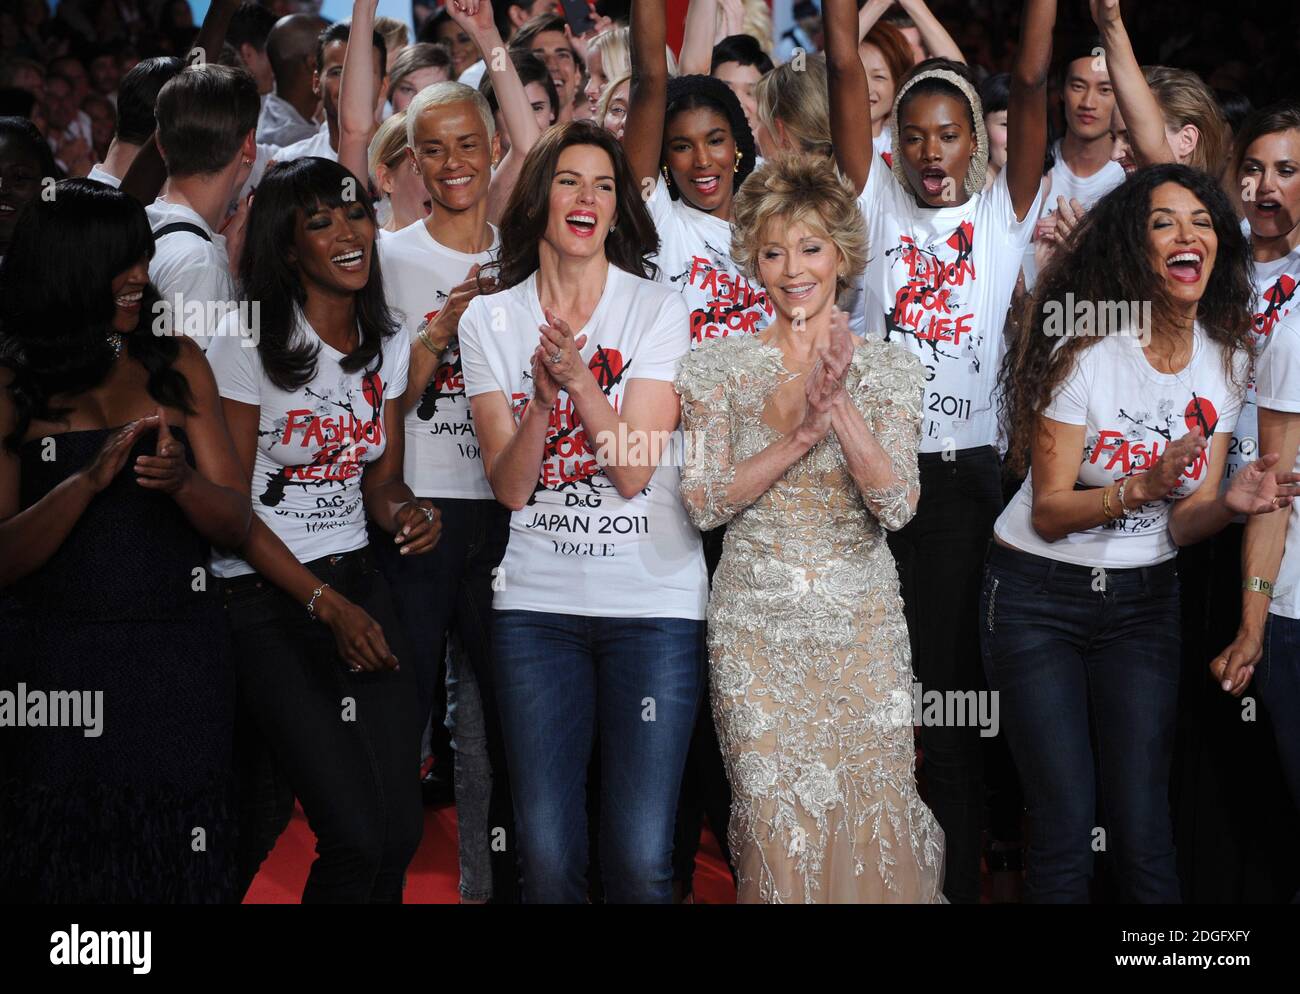 Naomi Campbell, actress Jane Fonda, Afef Jnifen and models on the catwalk at the Fashion For Relief Show, Cannes. Part of the 64th Cannes Film Festival. Stock Photo